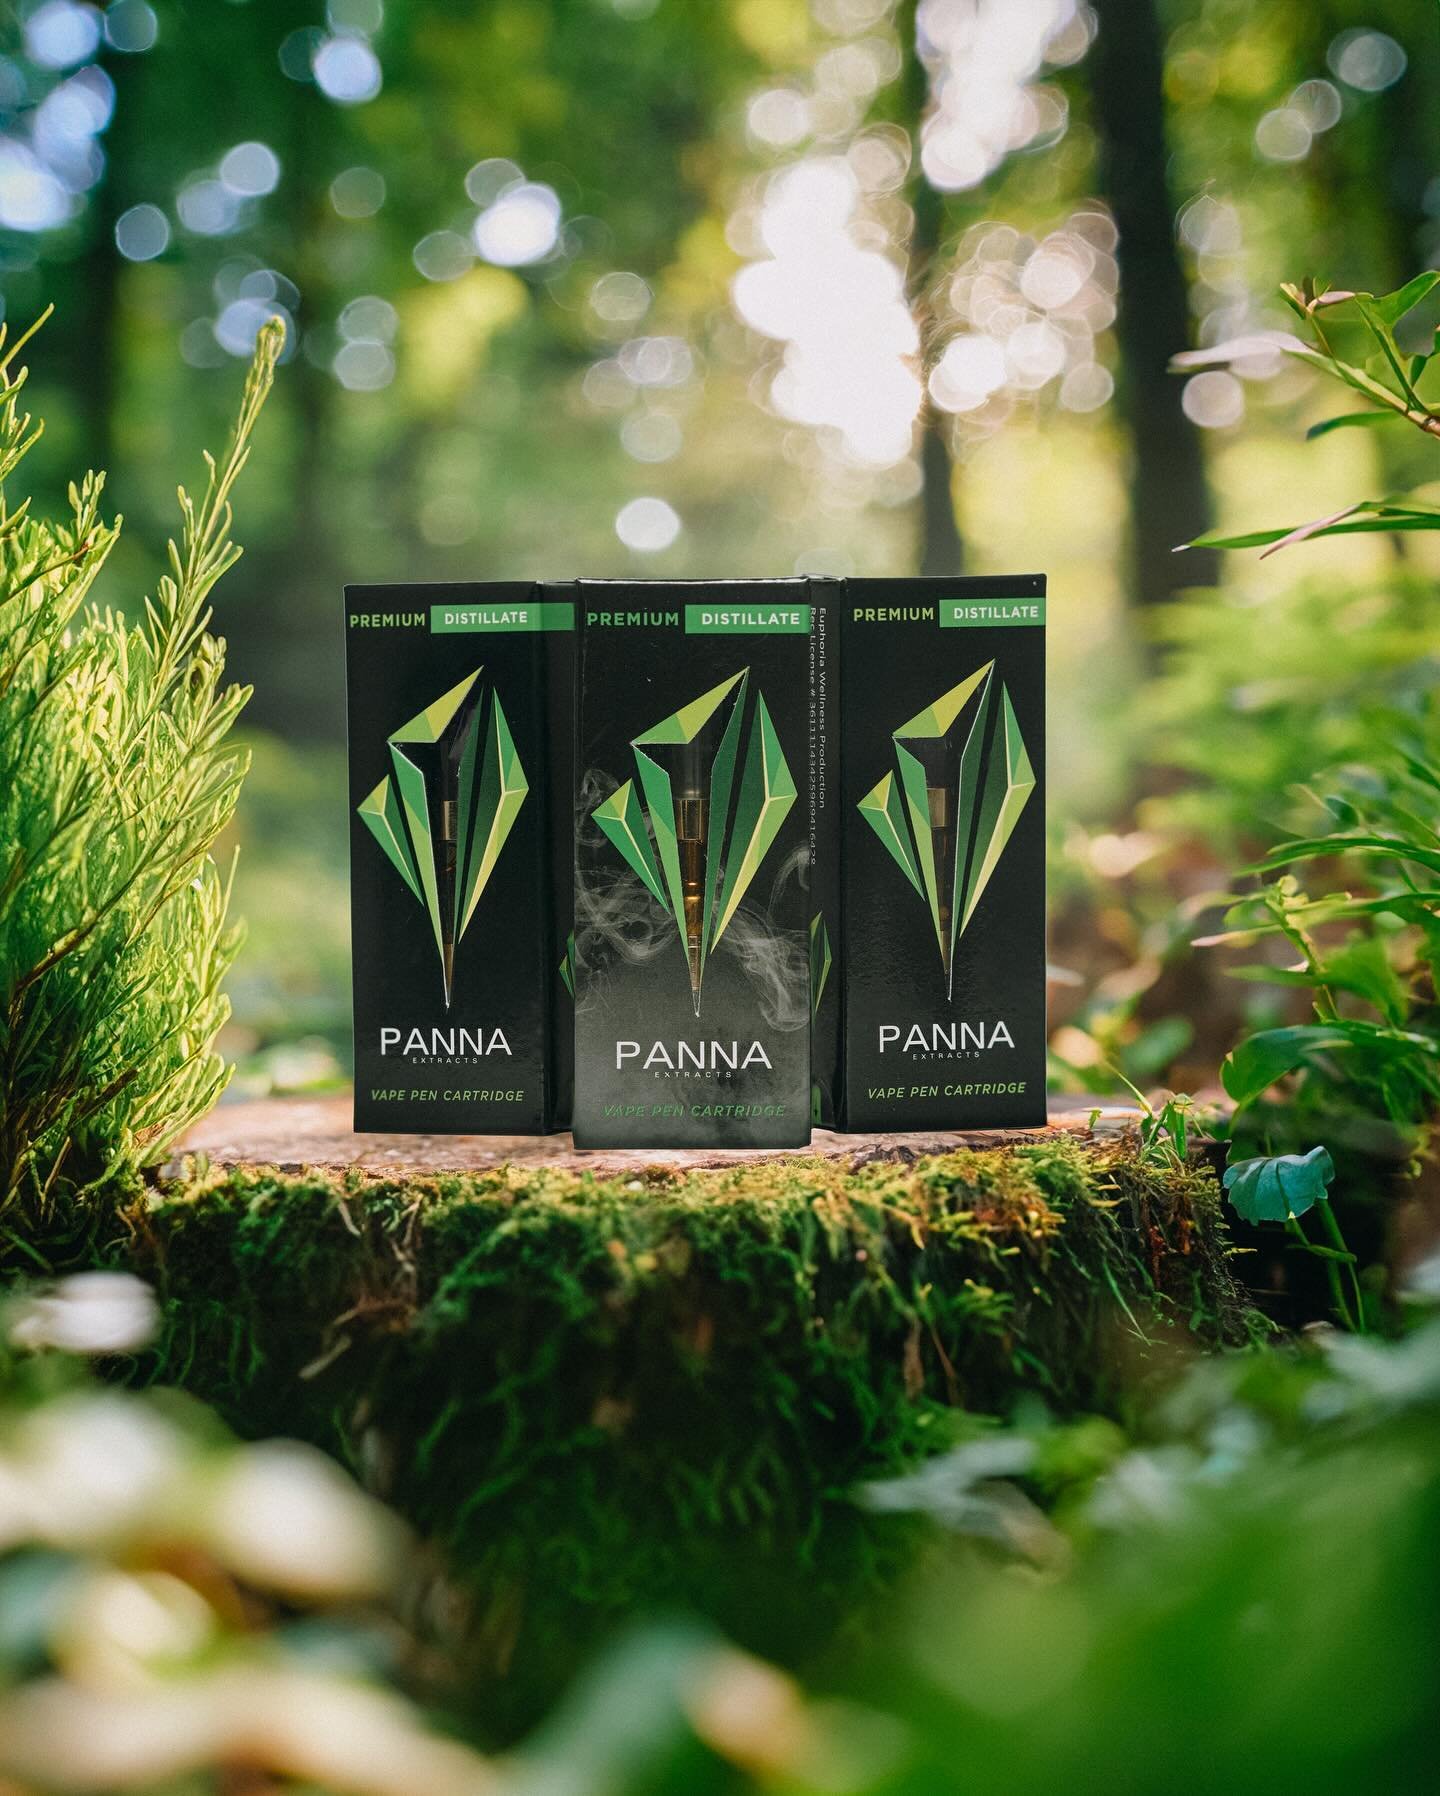 Enjoy the great outdoors with Panna 🌄

Keep out of reach of children. For use only by adults 21 years of age or older. Panna Extracts NV ID #RP089. NFS. 

#discover #explorepage #fyyppp #vegas #vegasstrip #nevada #likes #like #follow #likeforlikes #